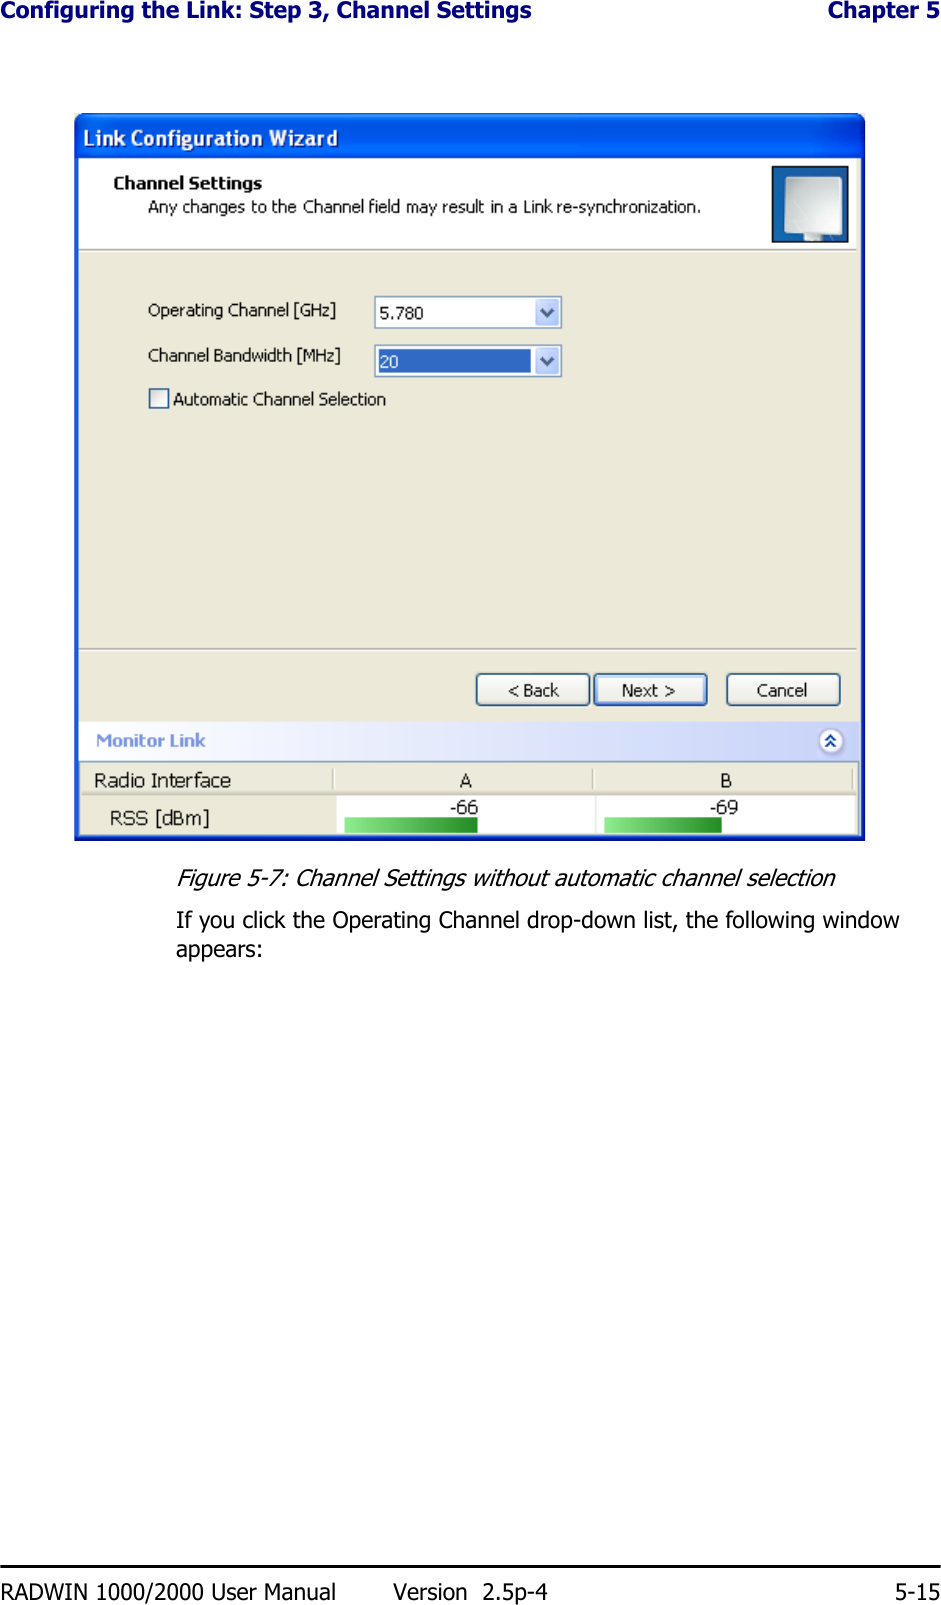 Configuring the Link: Step 3, Channel Settings  Chapter 5RADWIN 1000/2000 User Manual Version  2.5p-4 5-15Figure 5-7: Channel Settings without automatic channel selectionIf you click the Operating Channel drop-down list, the following window appears: